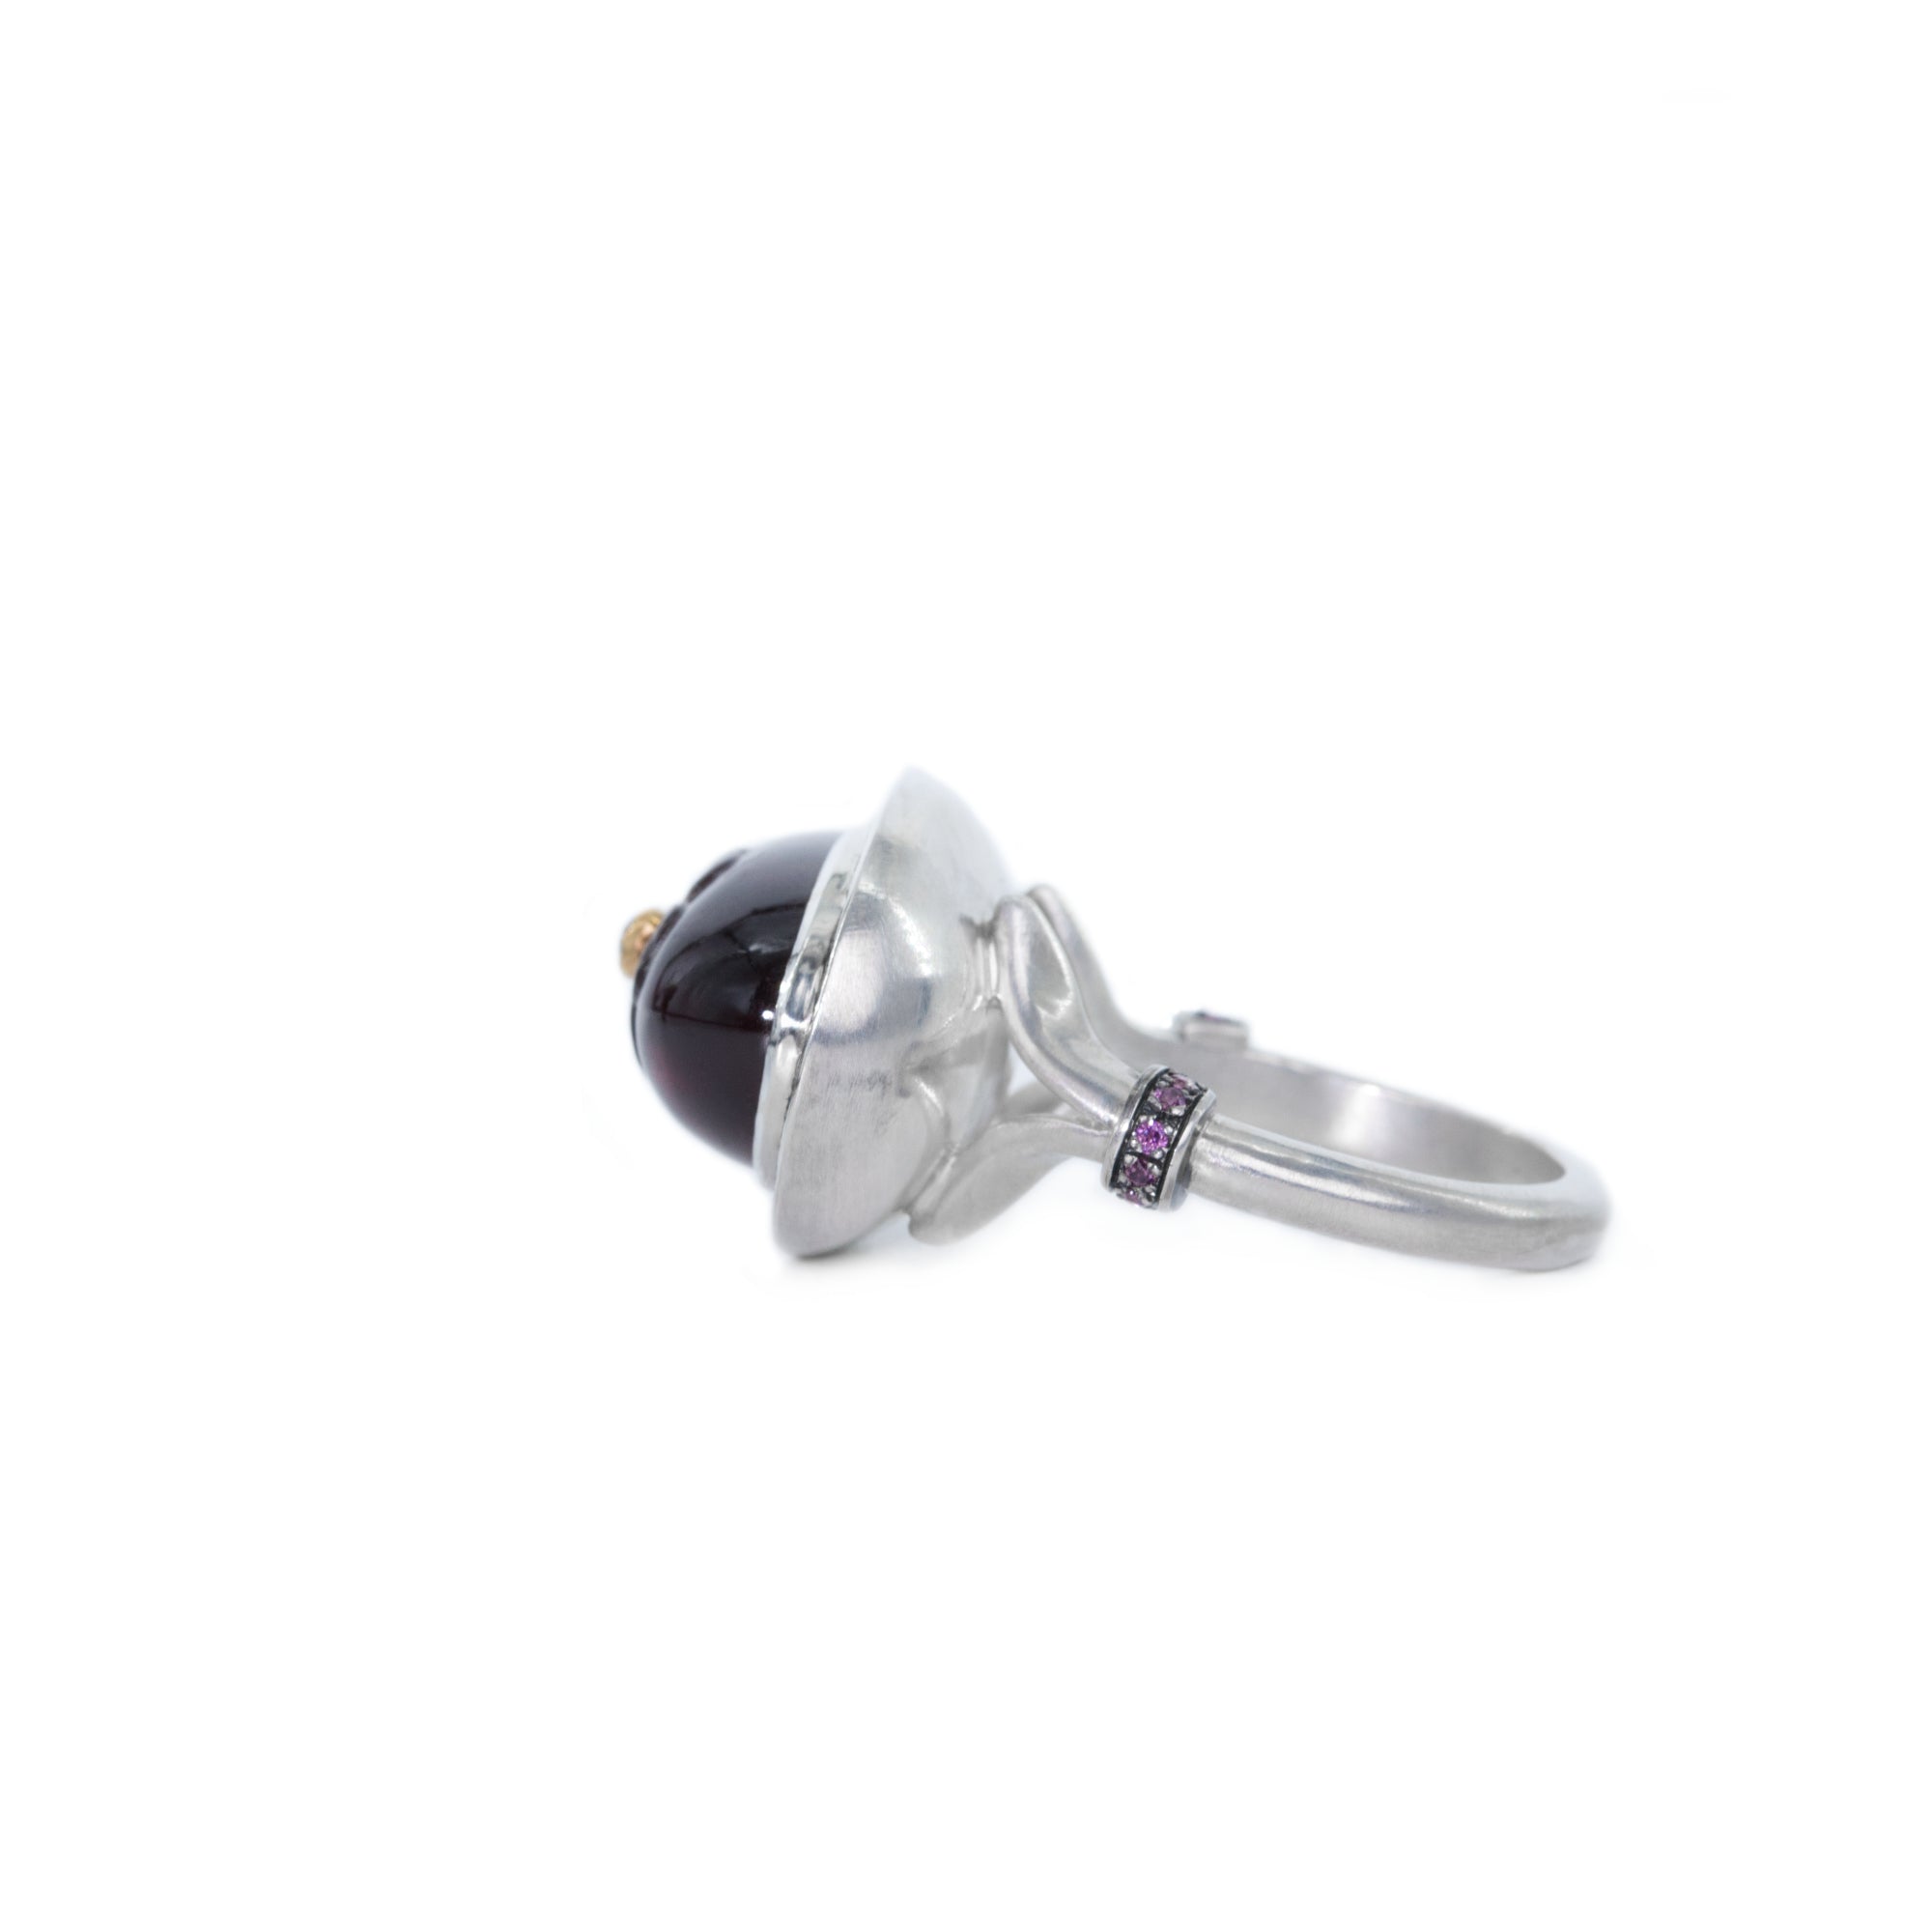 Sterling silver ring with oval rhodolite cabochon features the right side of the ring. The gemstone with hand-carved flower and white diamond. The shank of the ring is split and adorned with rhodolites.